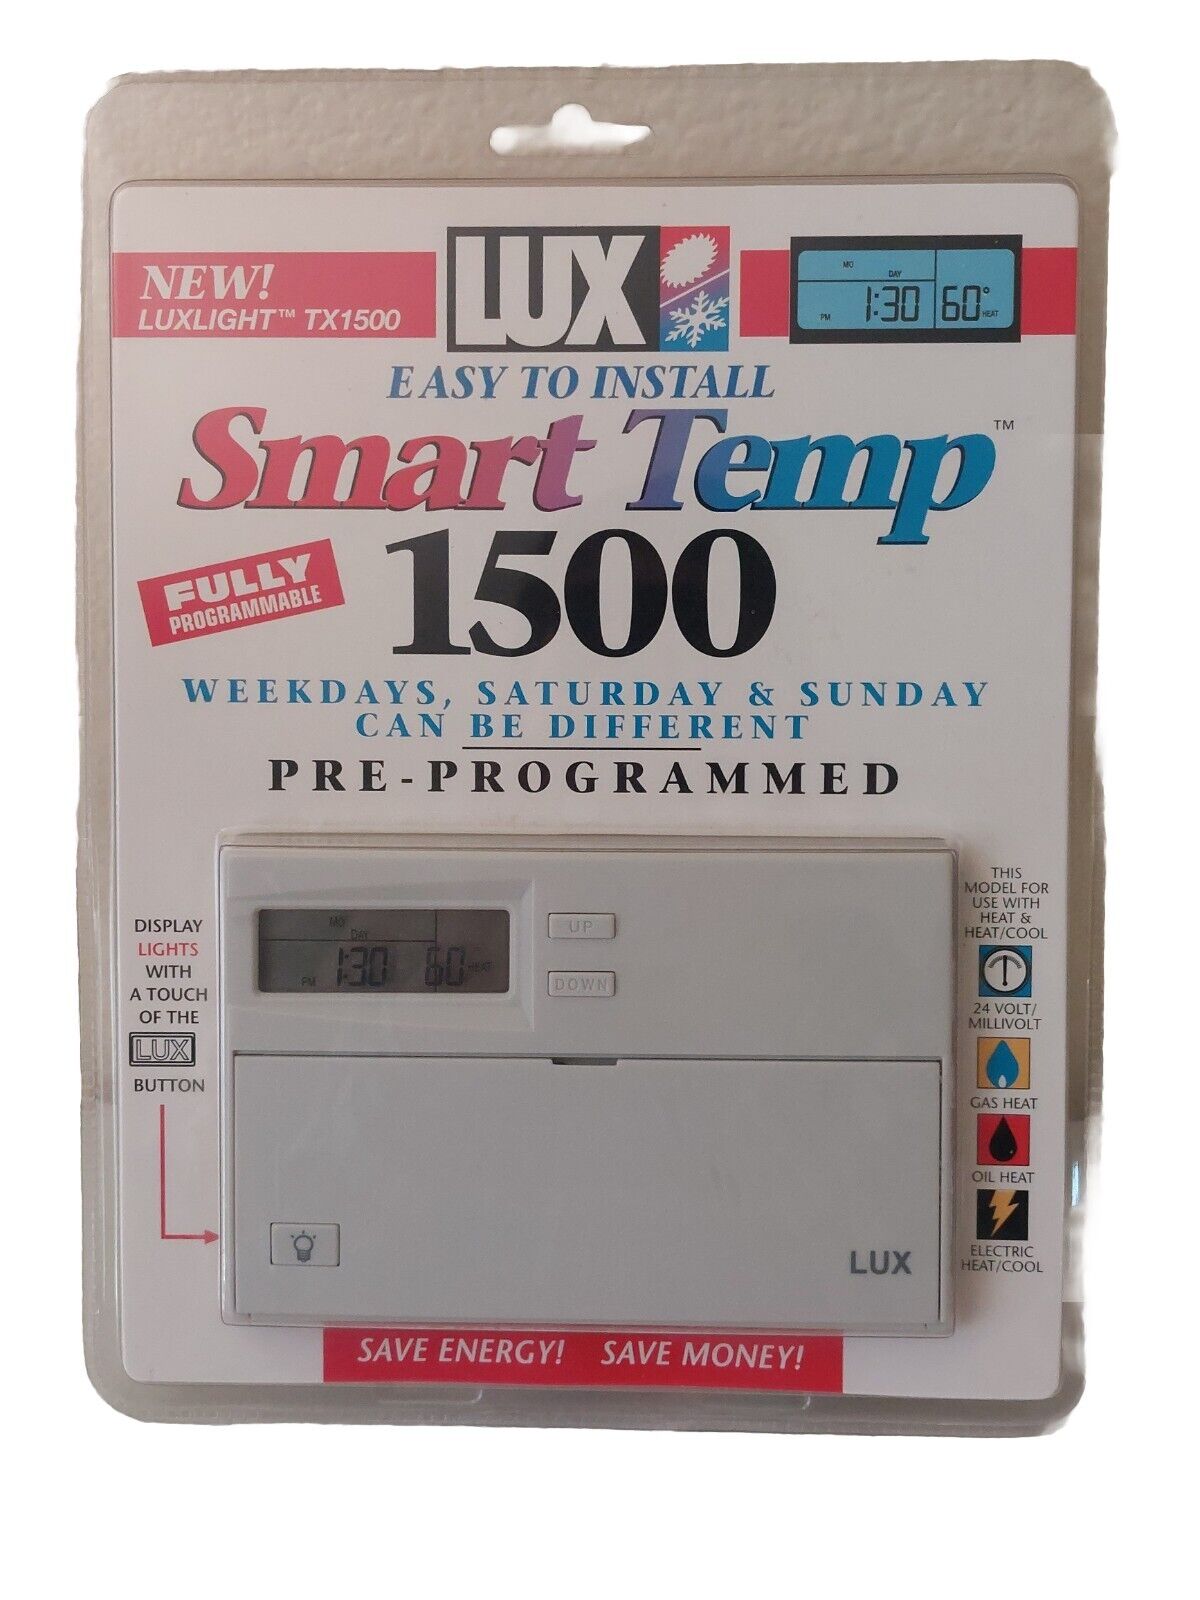 LUX TX1500 Smart Temp Fully Pre Programmable Luxlight TX1500 Heat & Cold - New